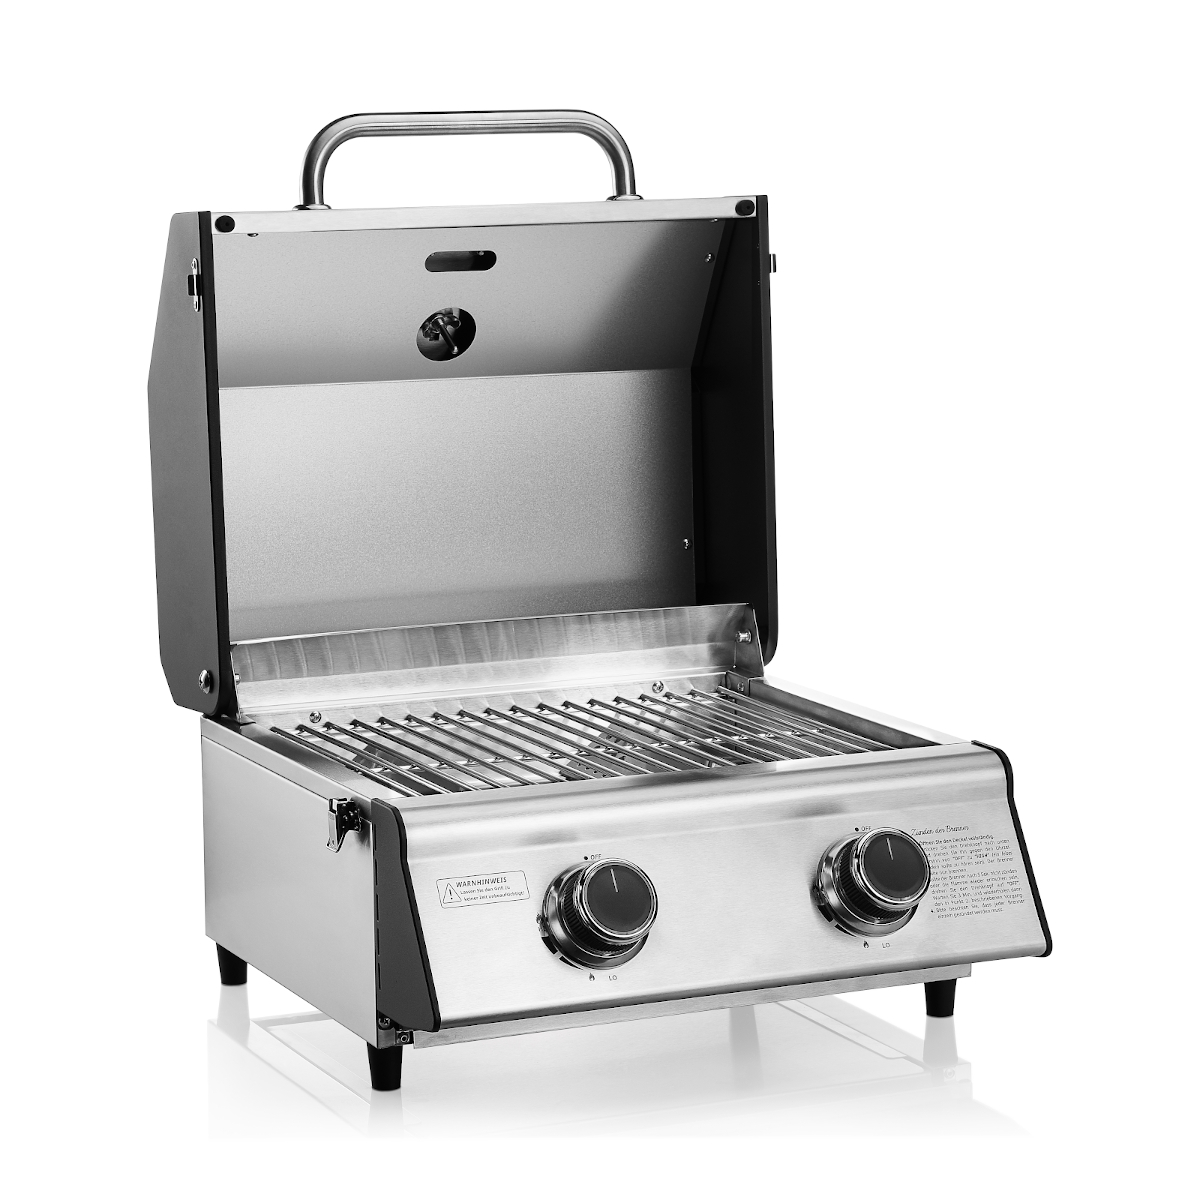 S 2.0 Silber TAINO Gasgrill, (4,4 COMPACT kW)